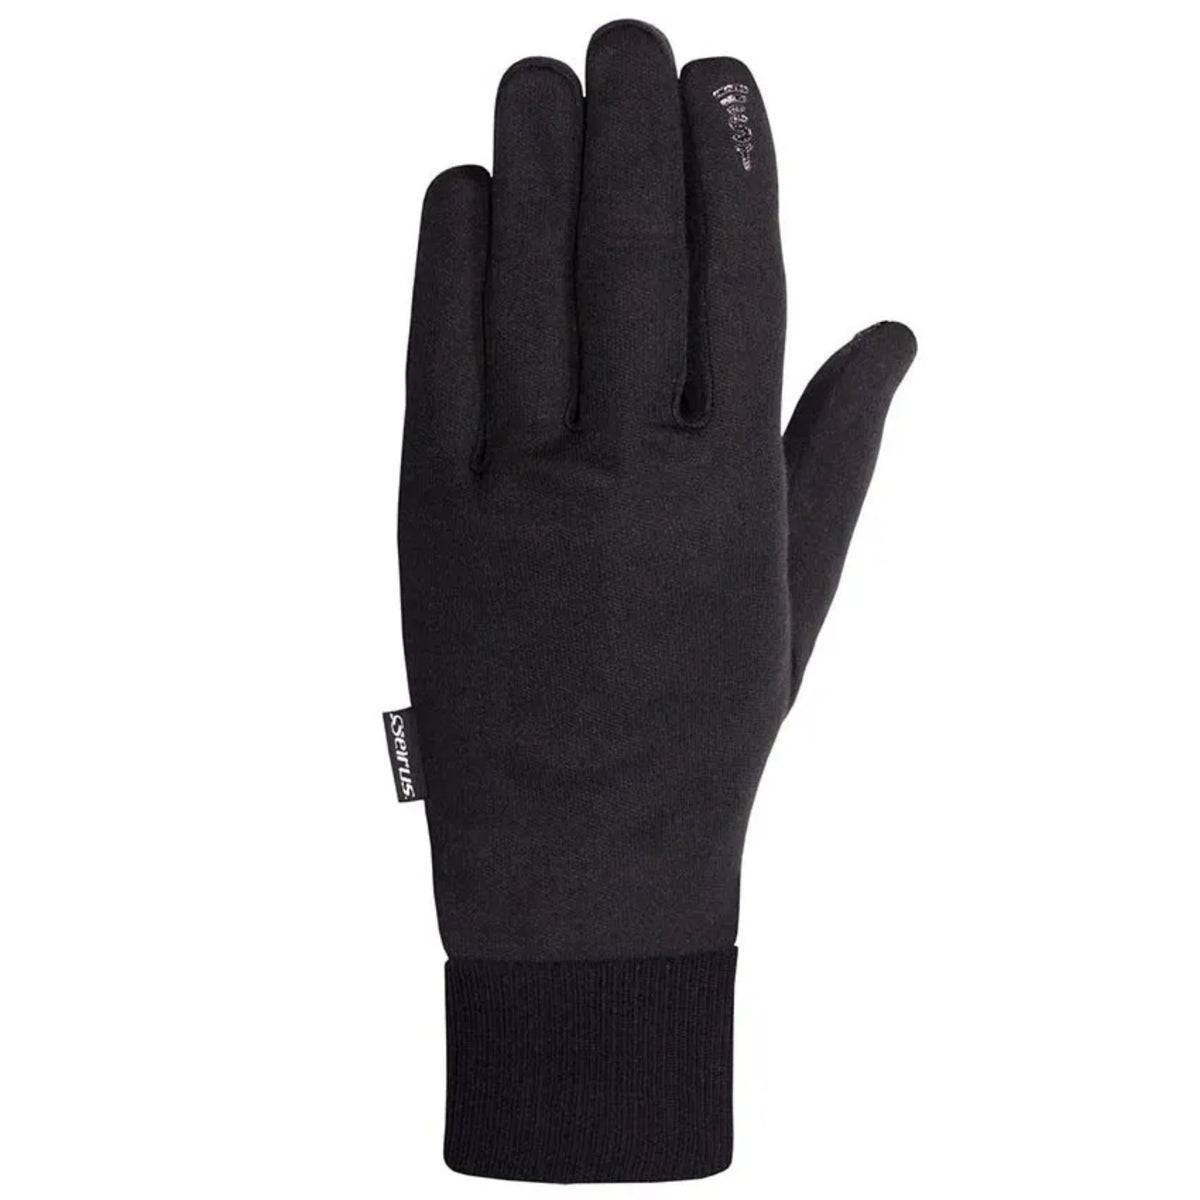 SEIRUS_DELUXE_THERMAX_SOUNDTOUCH_GLOVE_LINER_BLK_01